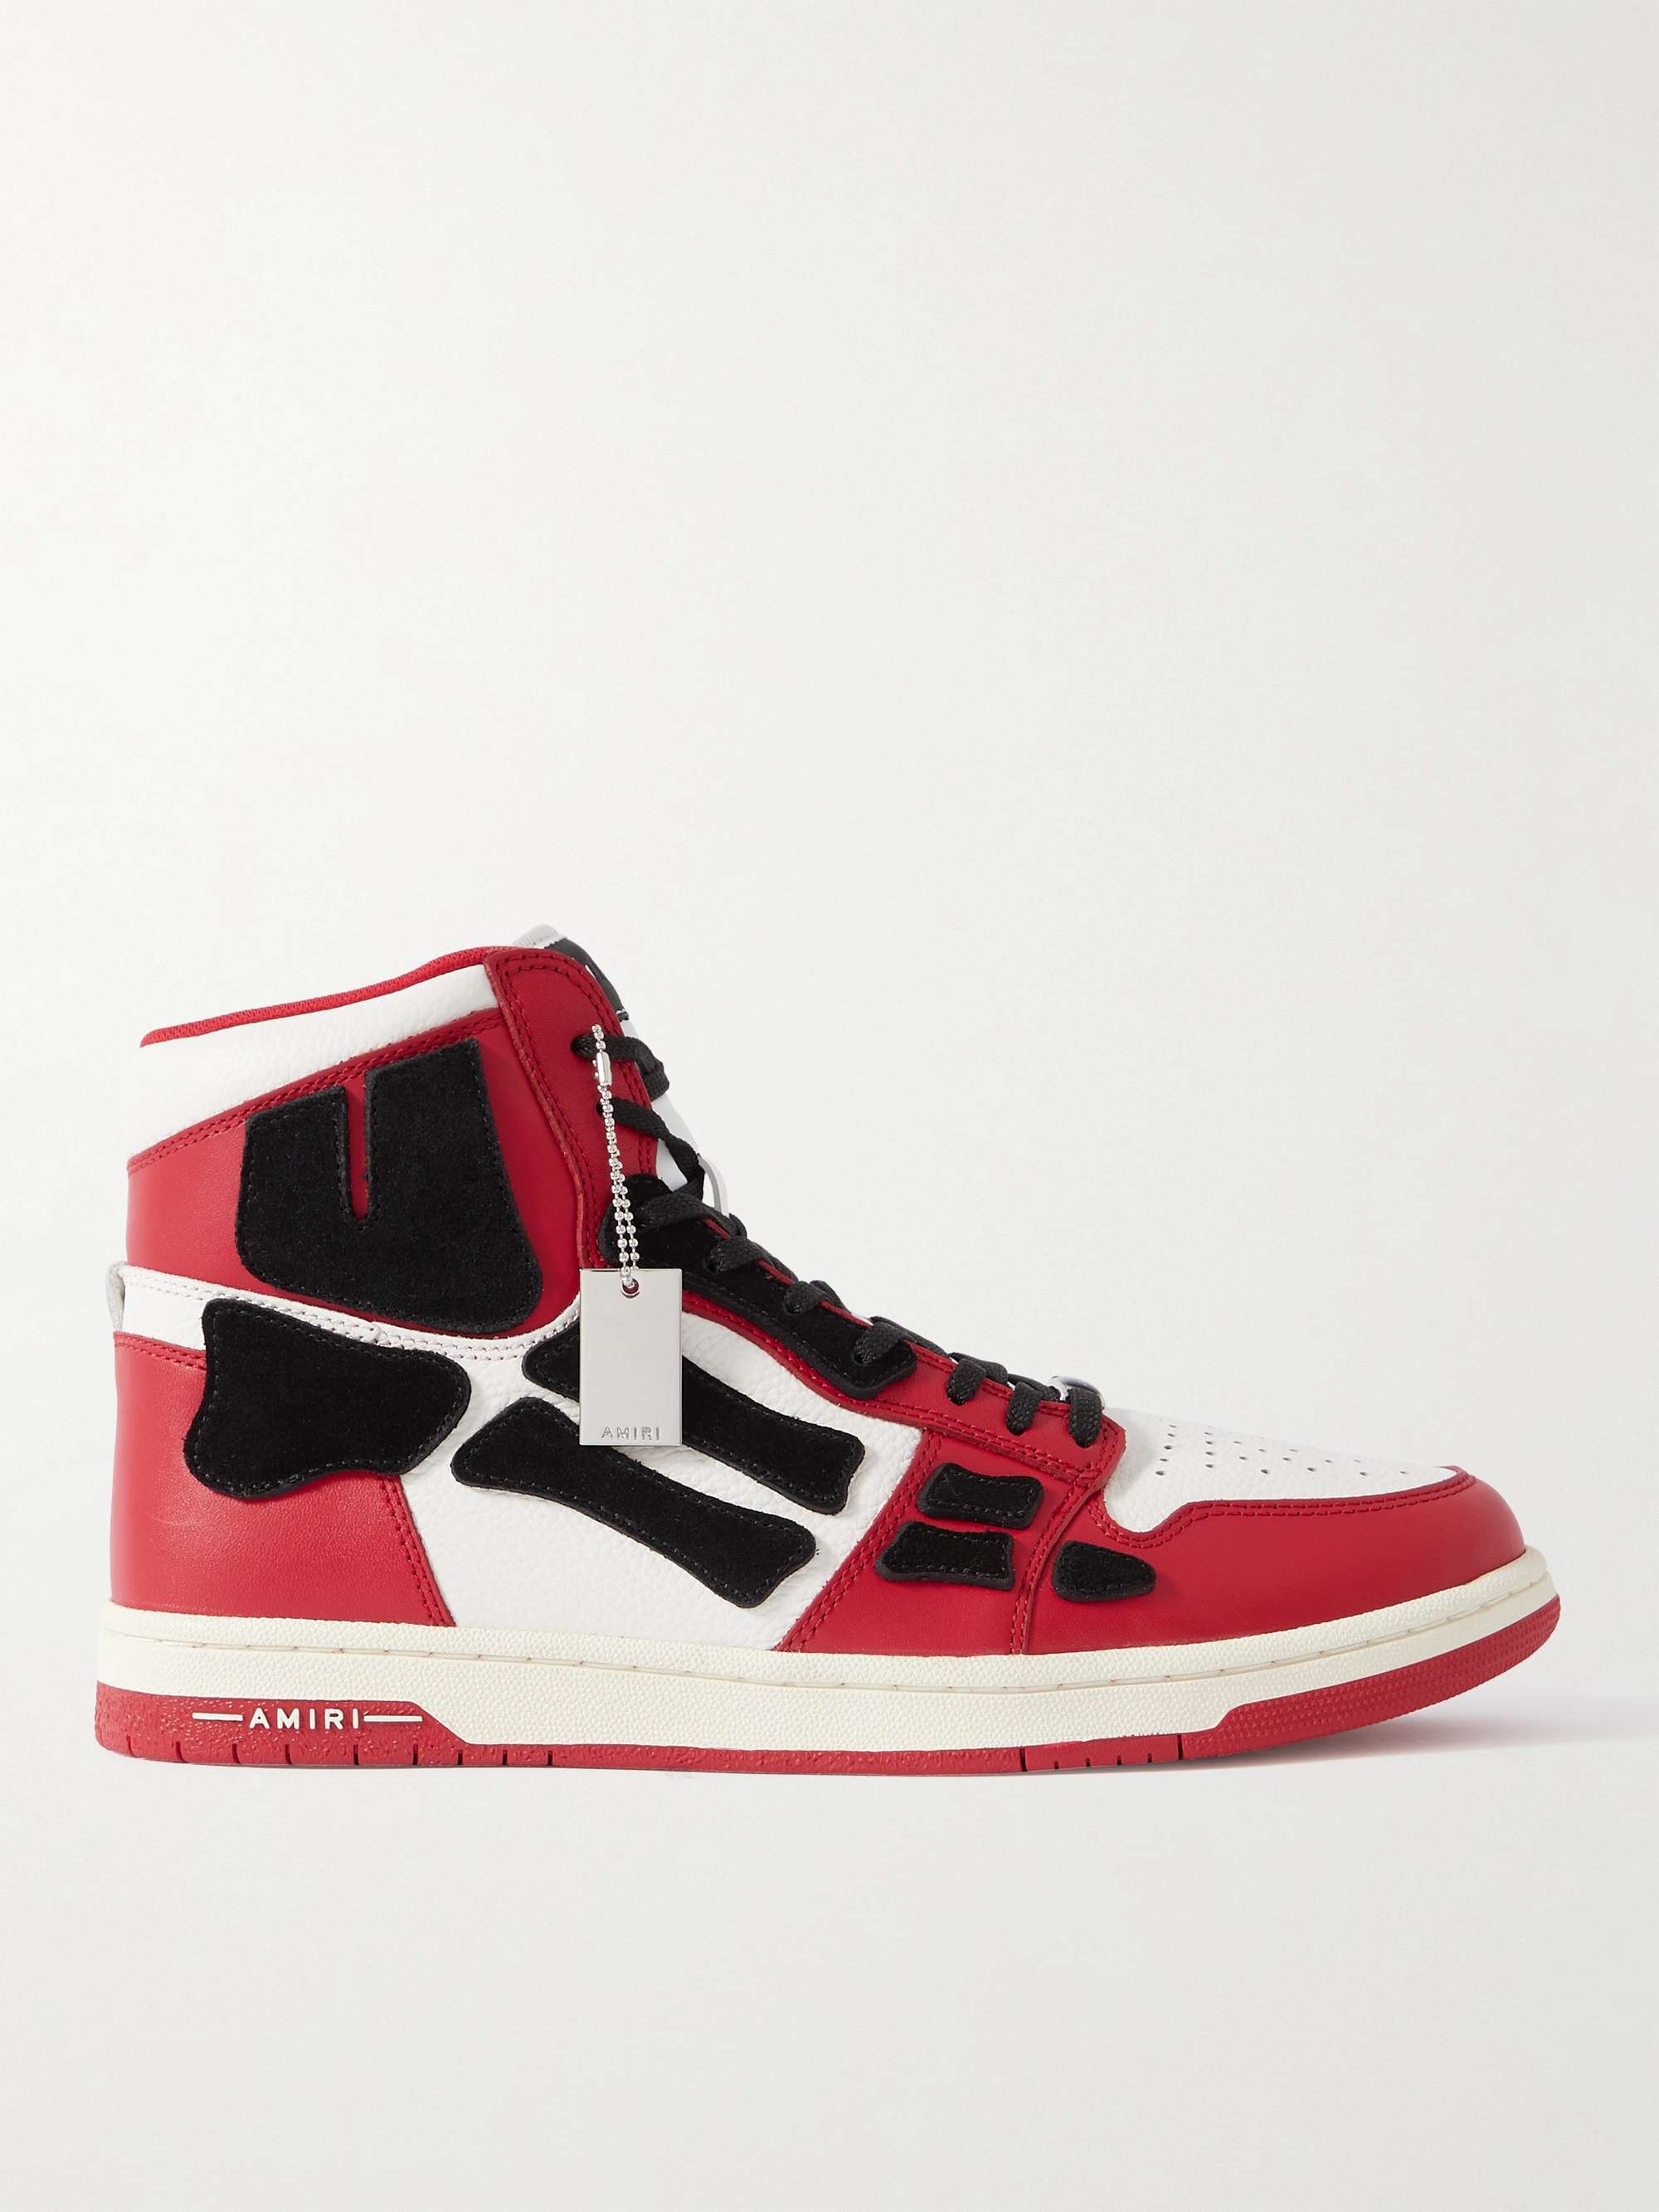 AMIRI Skel-Top Colour-Block Leather and Suede High-Top Sneakers | MR PORTER